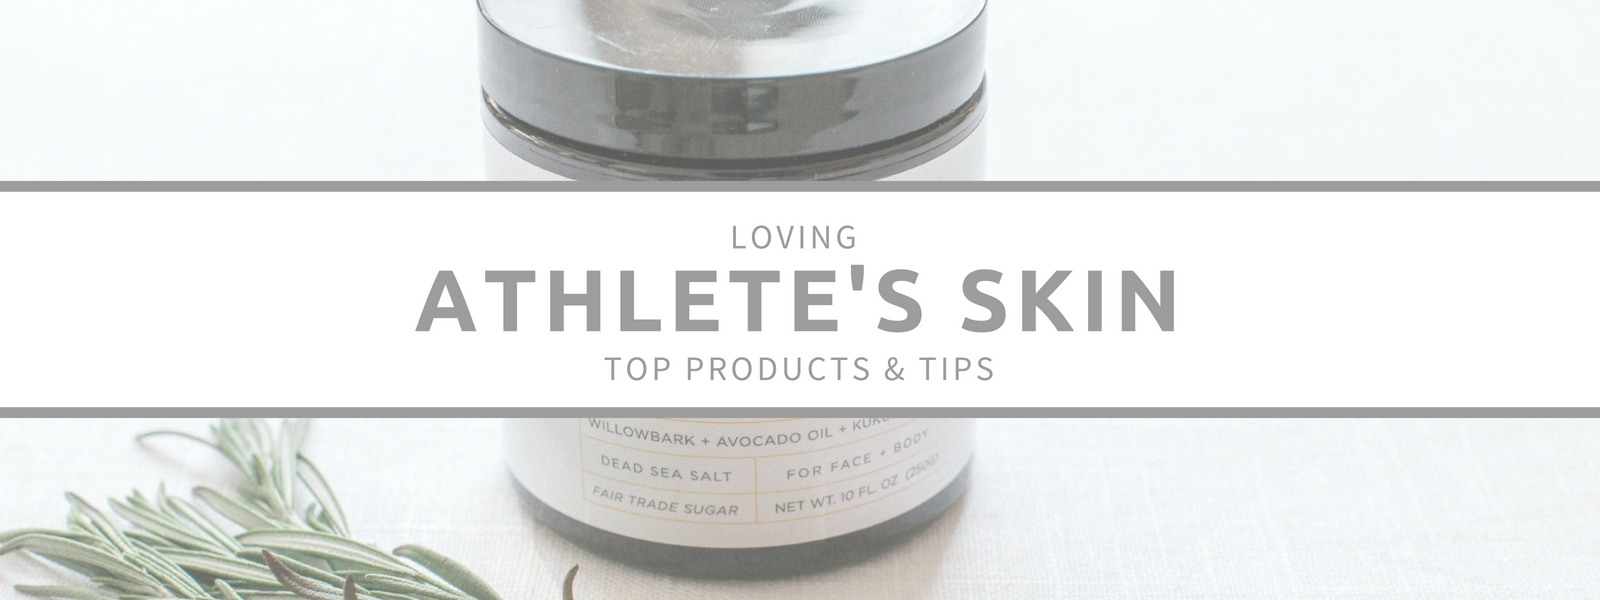 ATHLETE SKINCARE PRODUCTS